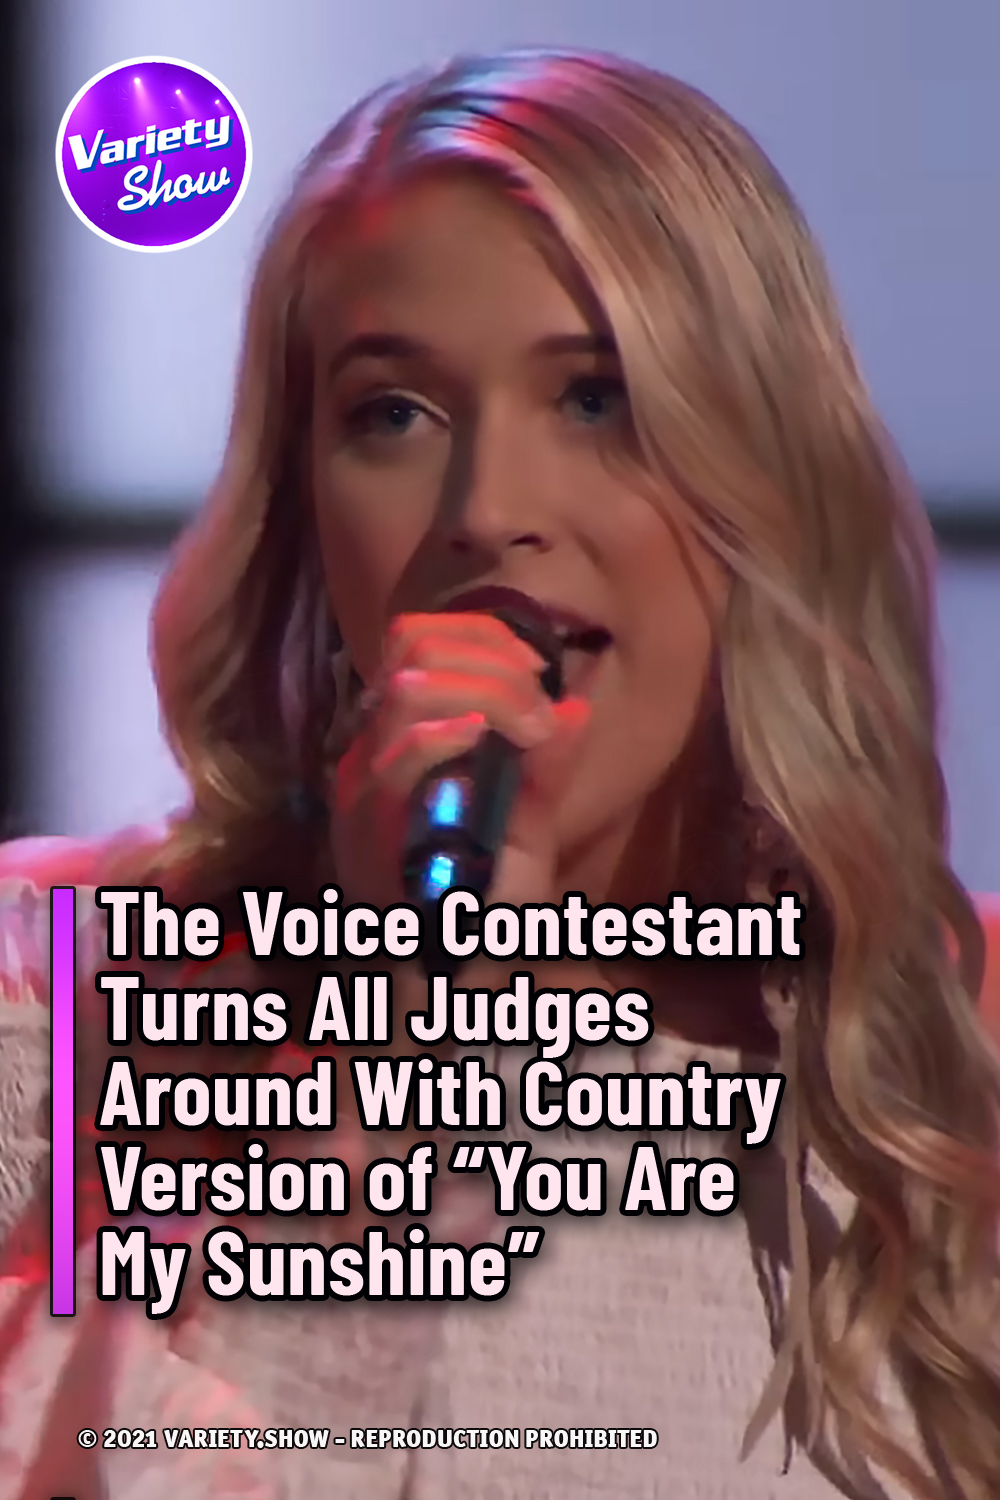 The Voice Contestant Turns All Judges Around With Country Version of “You Are My Sunshine”